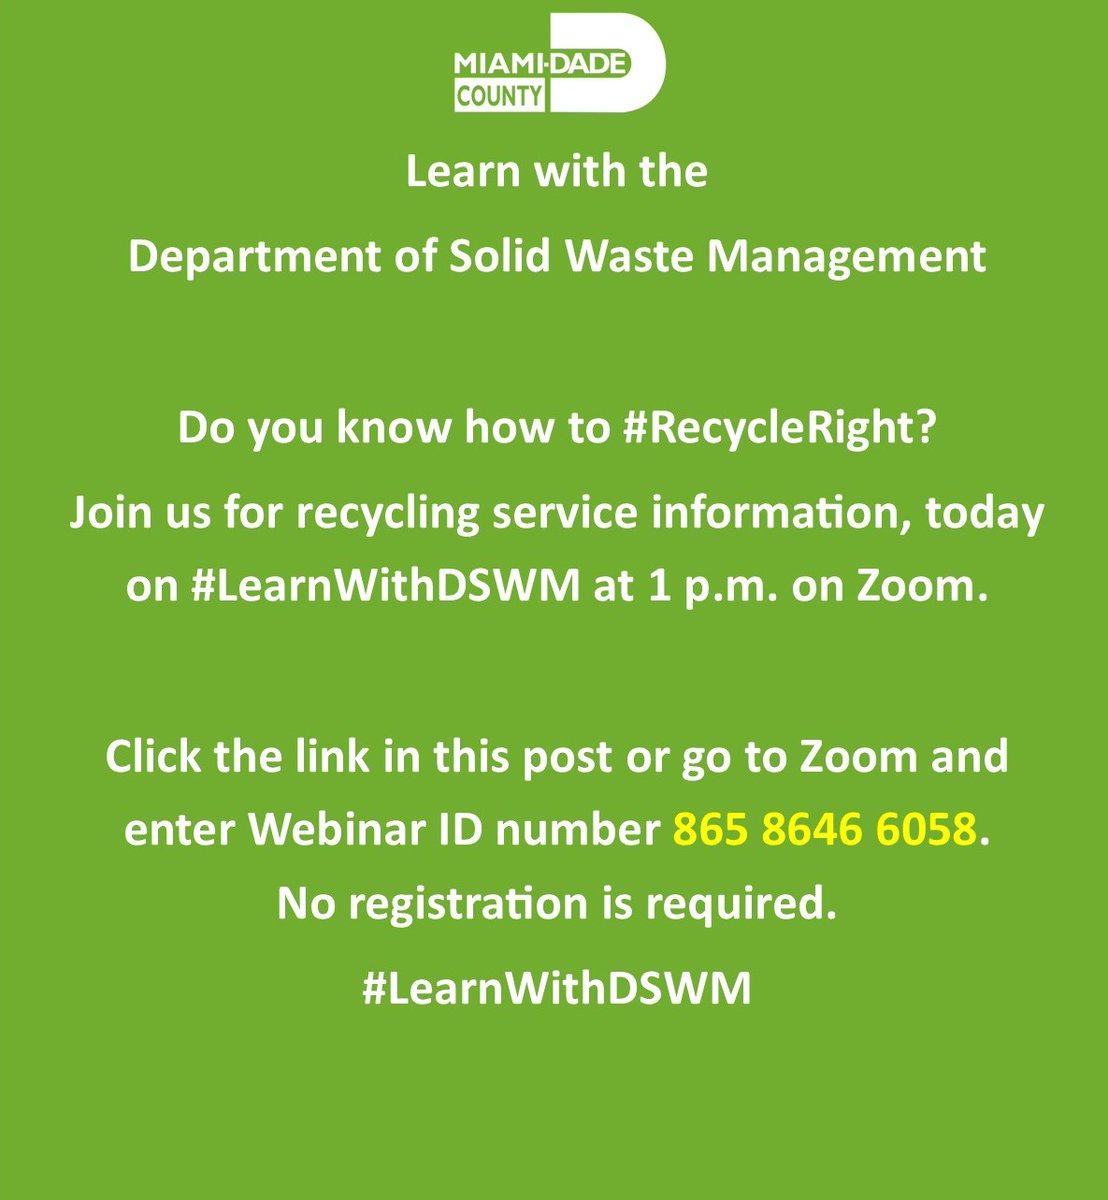 Join us for recycling service info, on #LearnWithDSWM today at 1 p.m. on Zoom. Visit miamidade.zoom.us/j/86586466058 to join or go to Zoom and enter Webinar ID number 865 8646 6058. No need to register. Can't watch live? - Watch on demand at bddy.me/3XtZIUk.